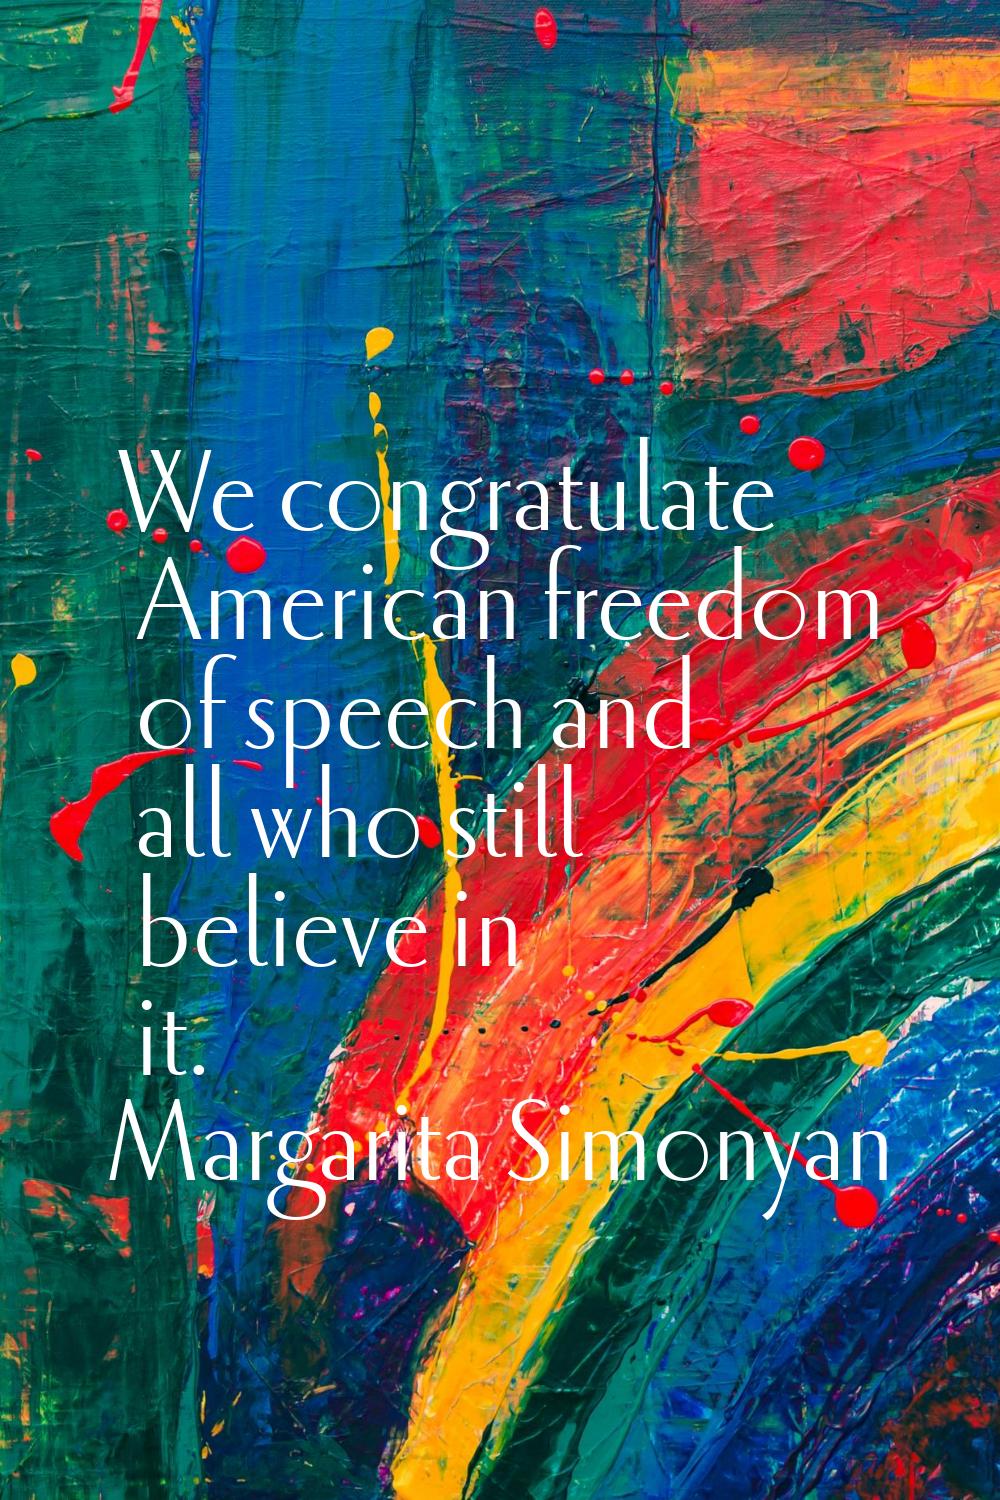 We congratulate American freedom of speech and all who still believe in it.